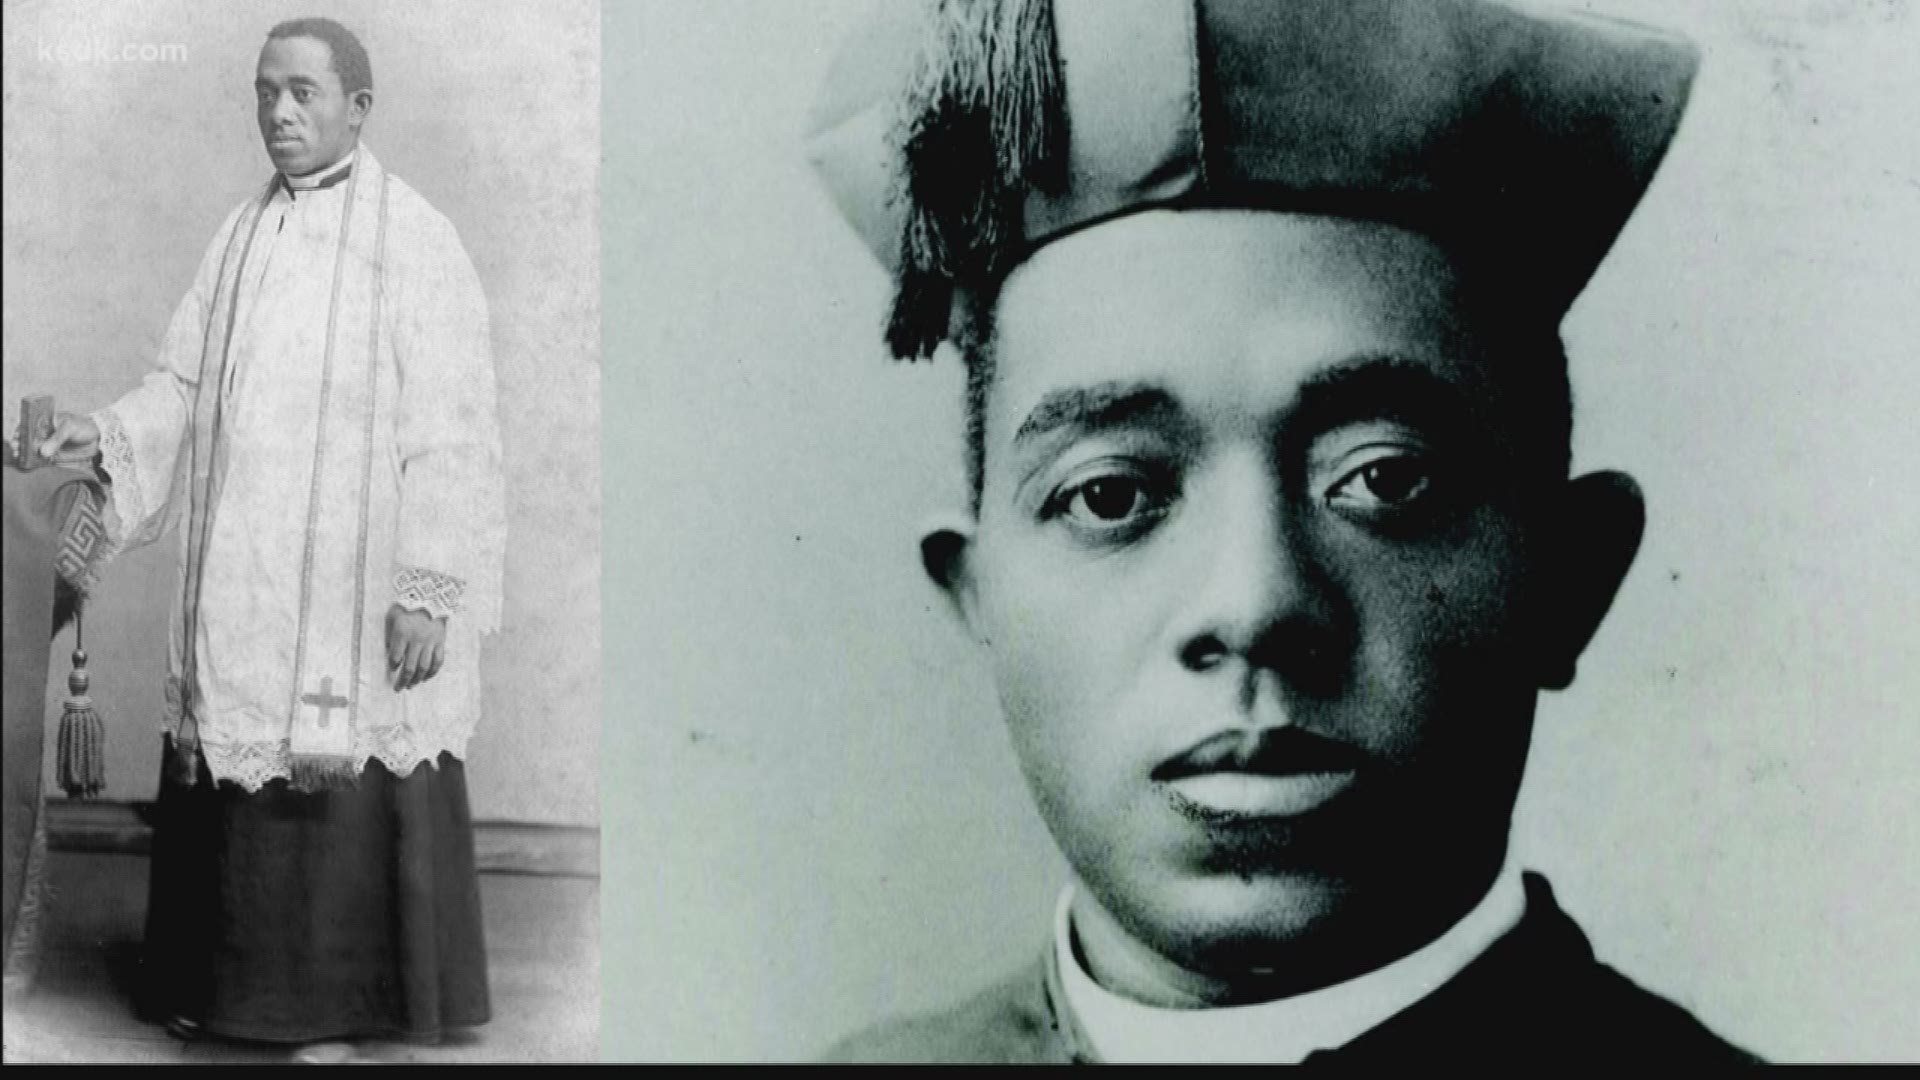 The canonization process for Father Tolton started in 2003.